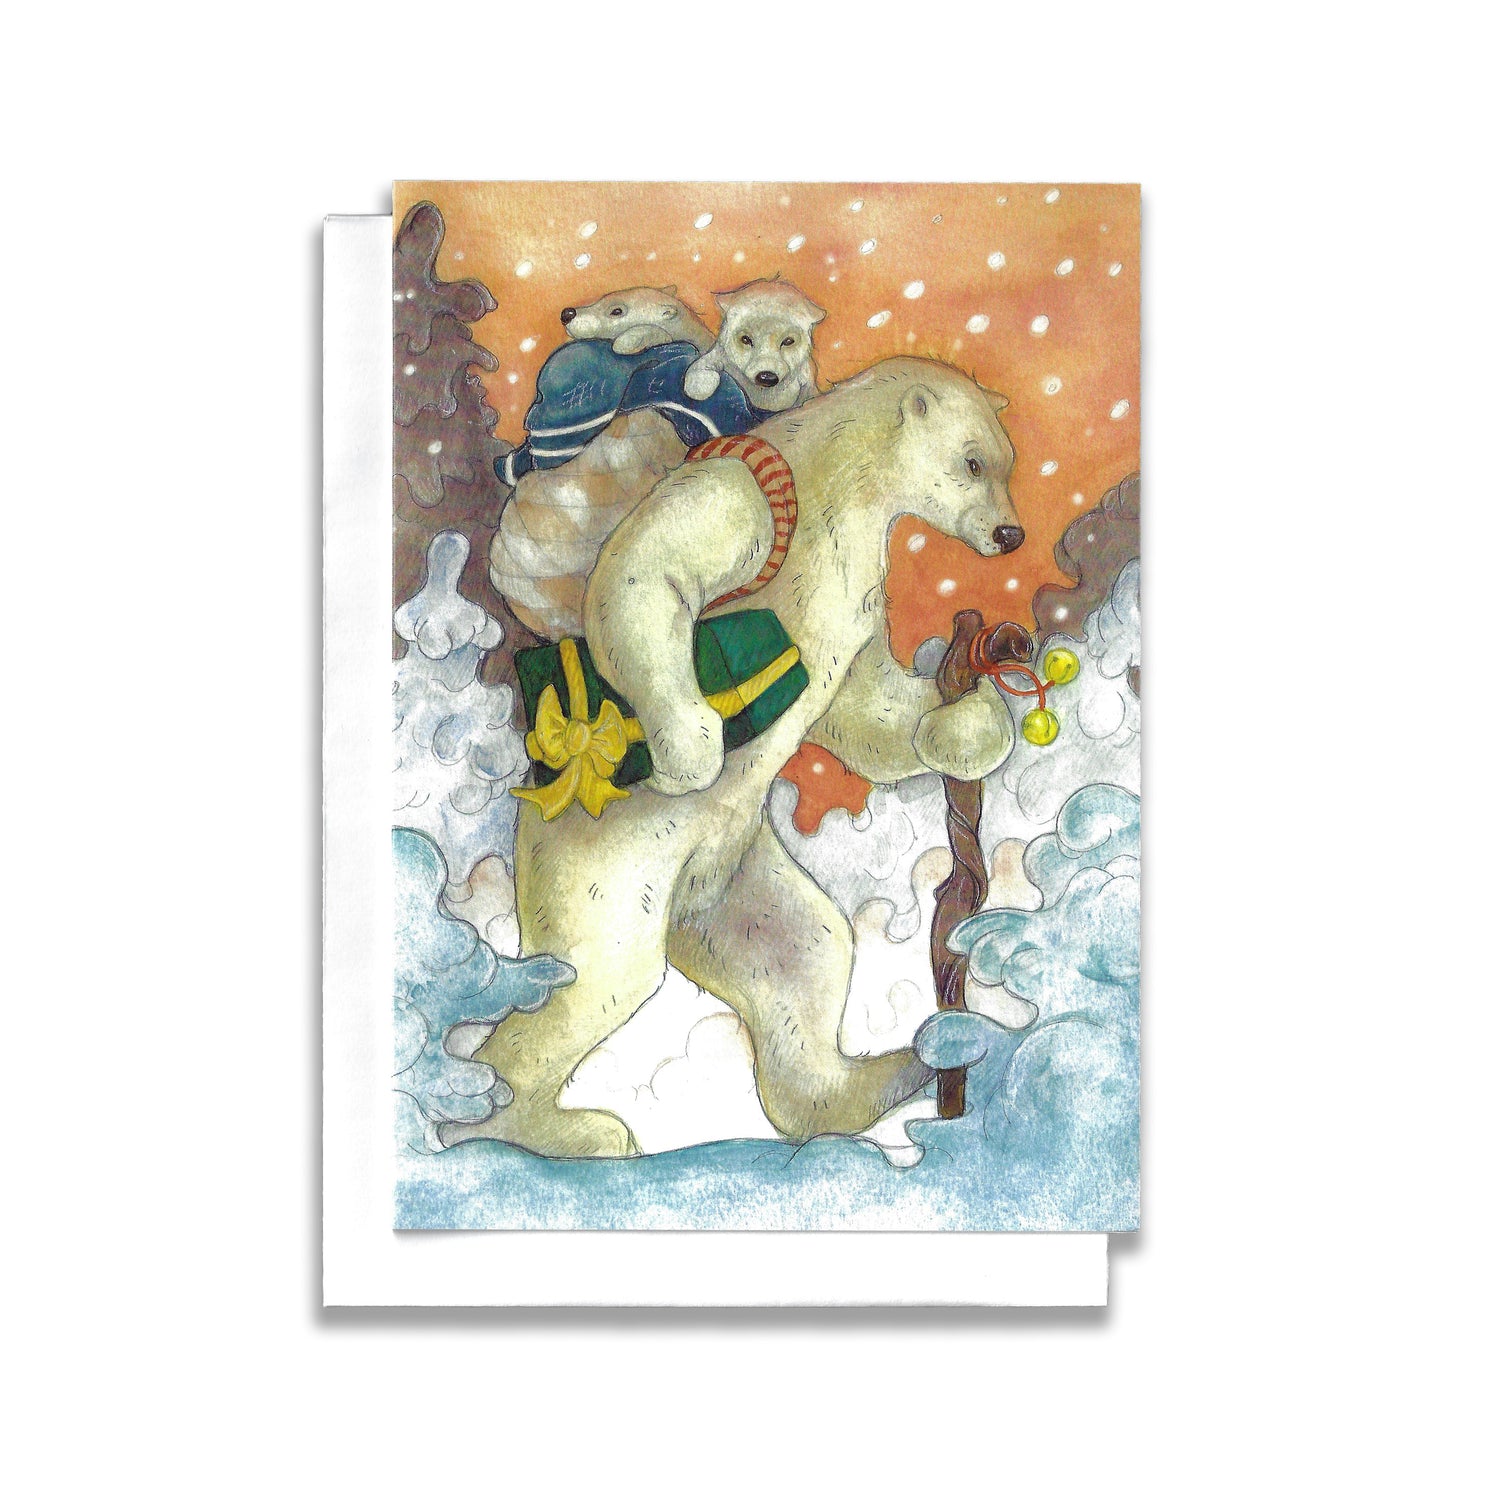 An illustrated Christmas cards of a polar bear carrying cubs  on back and a gift under arm.